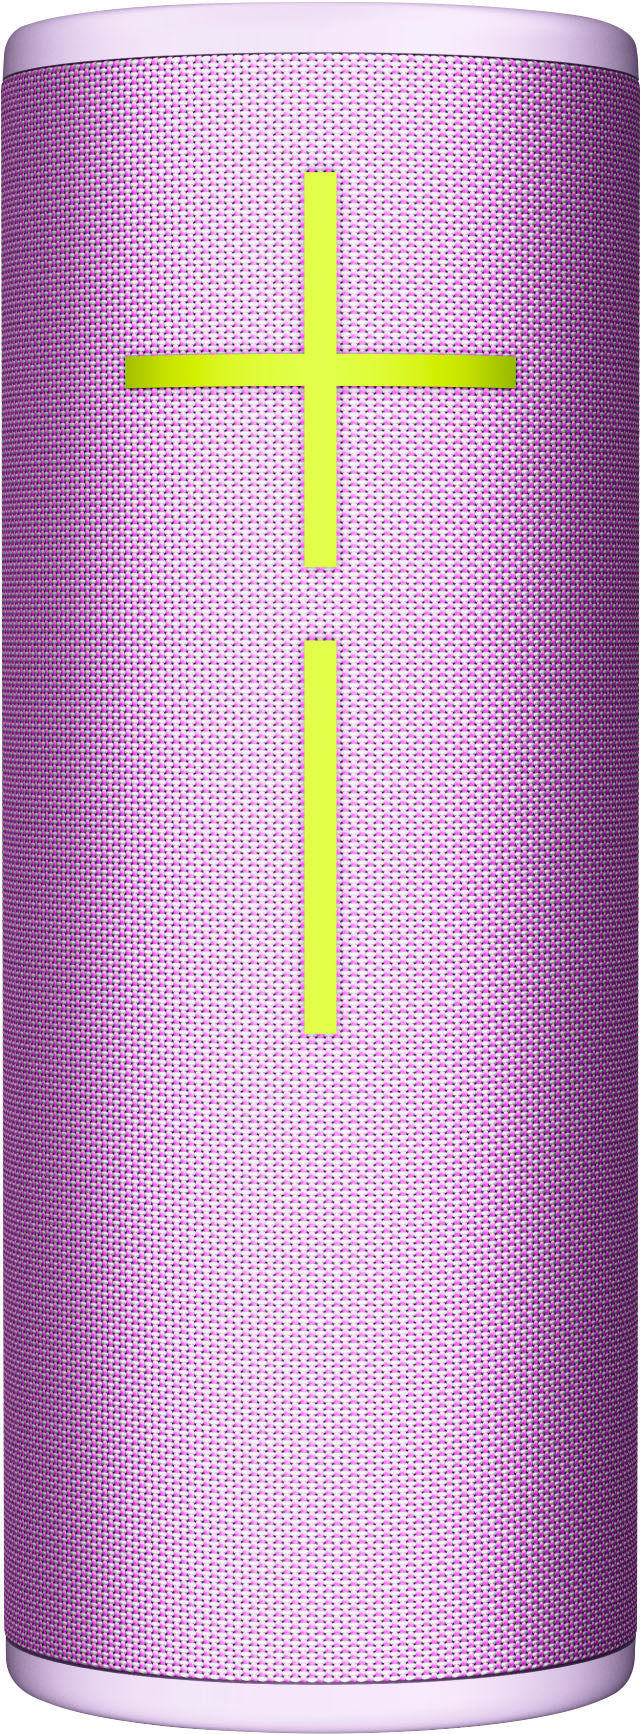 Ultimate Ears - BOOM 4 Portable Wireless Bluetooth Speaker with Waterproof, Dustproof and Floatable design - Enchanting Lilac_0